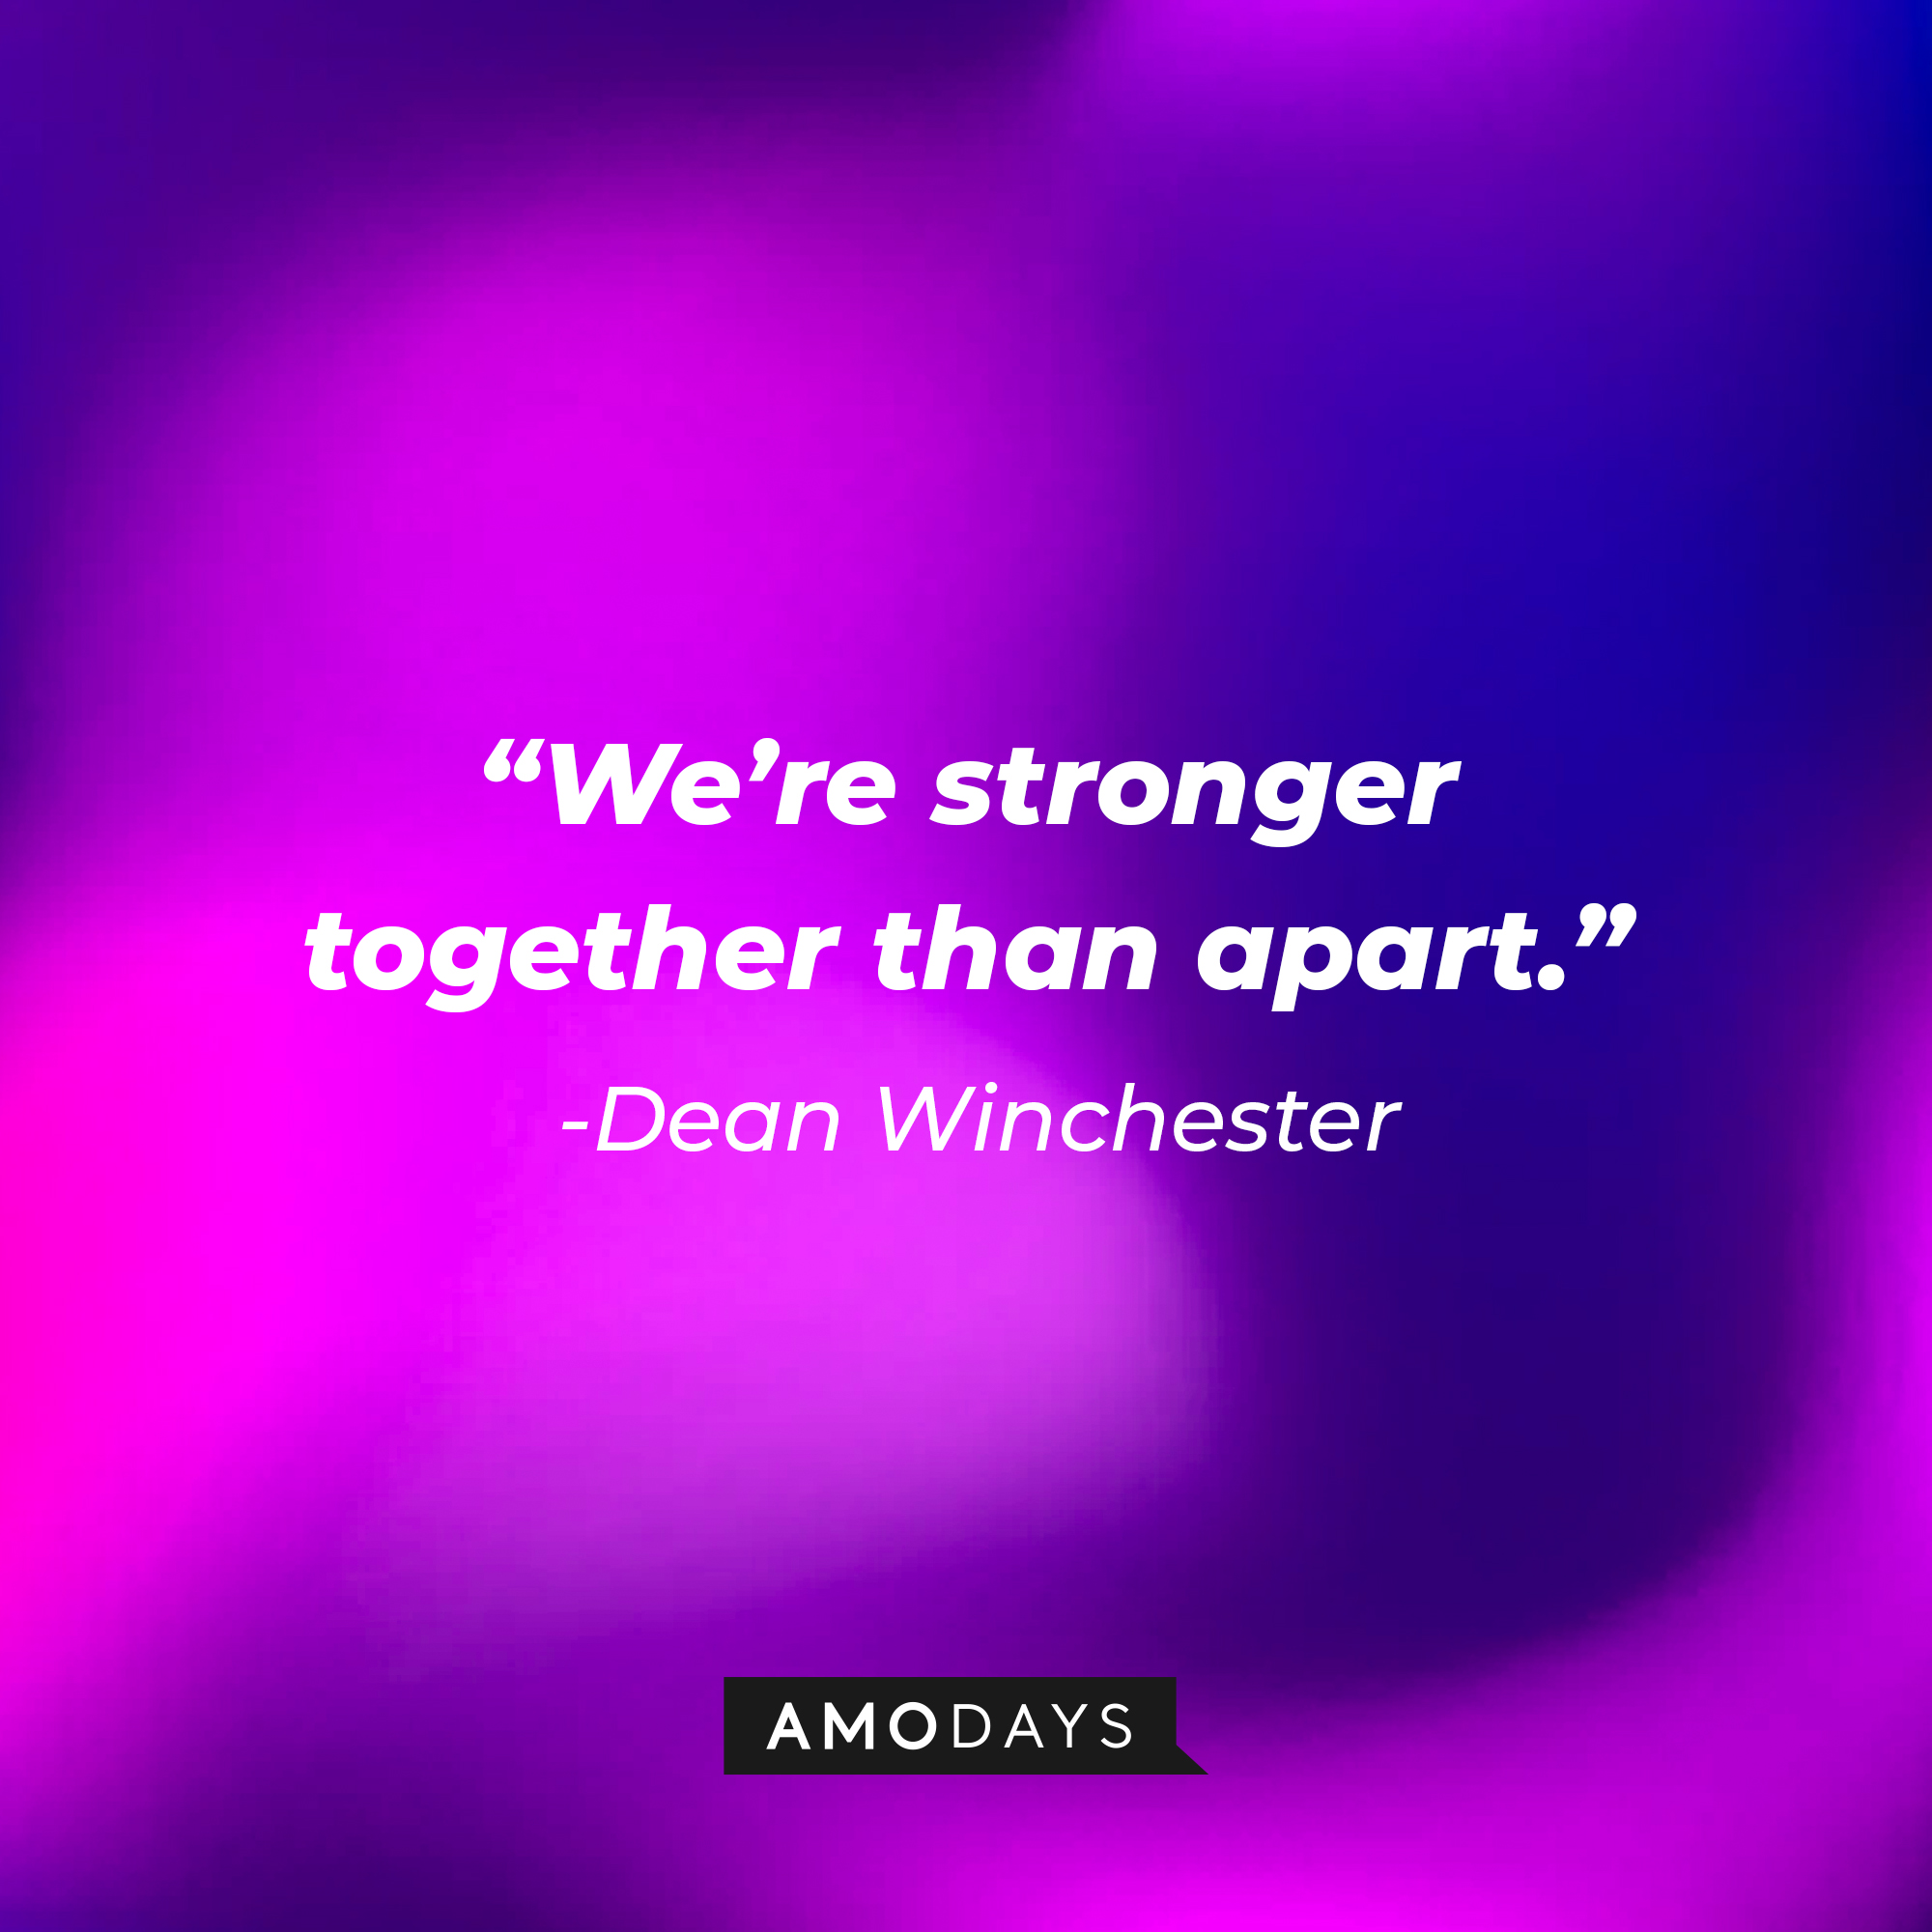 Dean Winchester's quote: "We’re stronger together than apart.” | Source: AmoDays